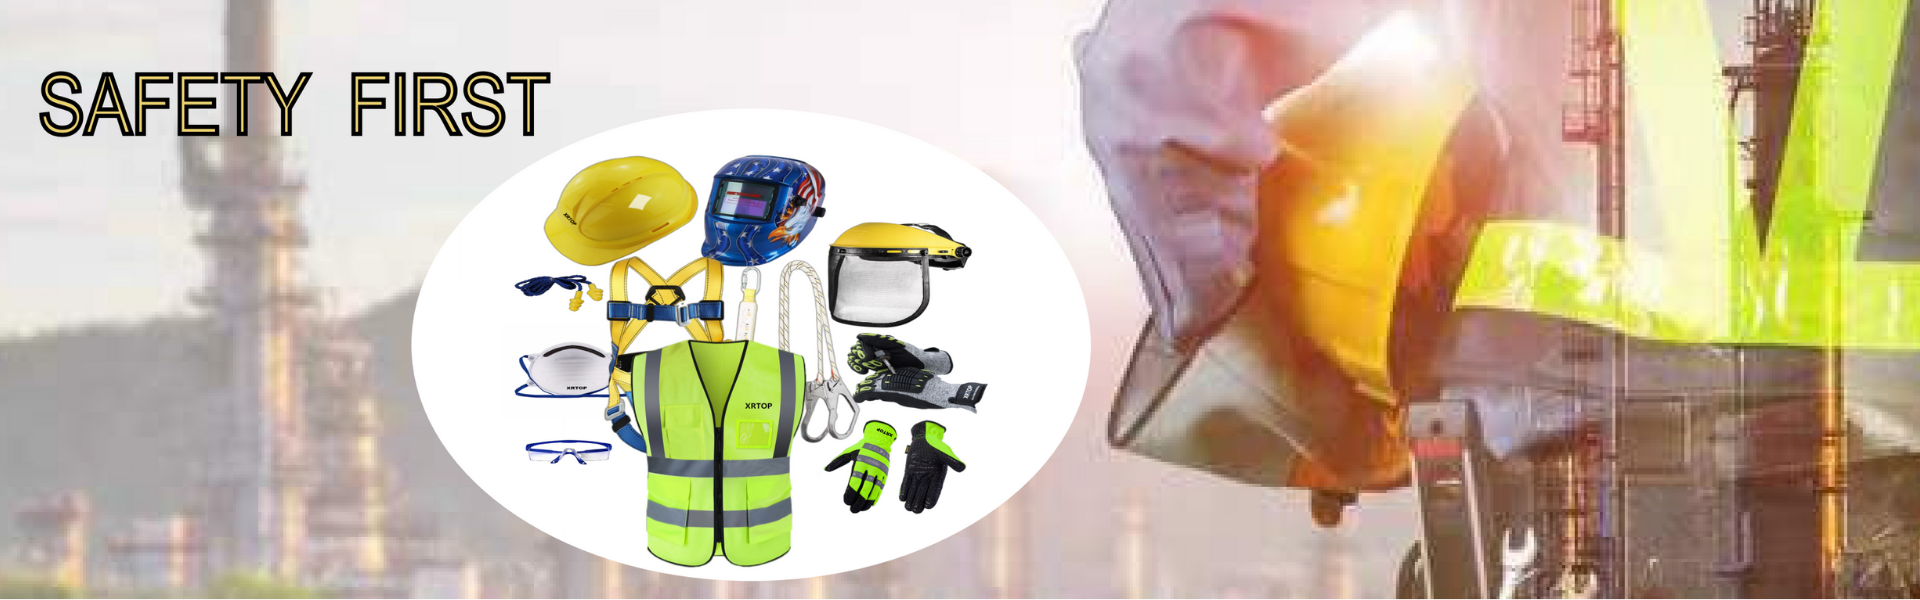 Huzhou xrtop specializes in all kinds of safety gloves, protective glasses, welding masks, helmets, safety harnesses, safety ropes, labor protection shoes, reflective vests, earplugs, reflective strips, etc